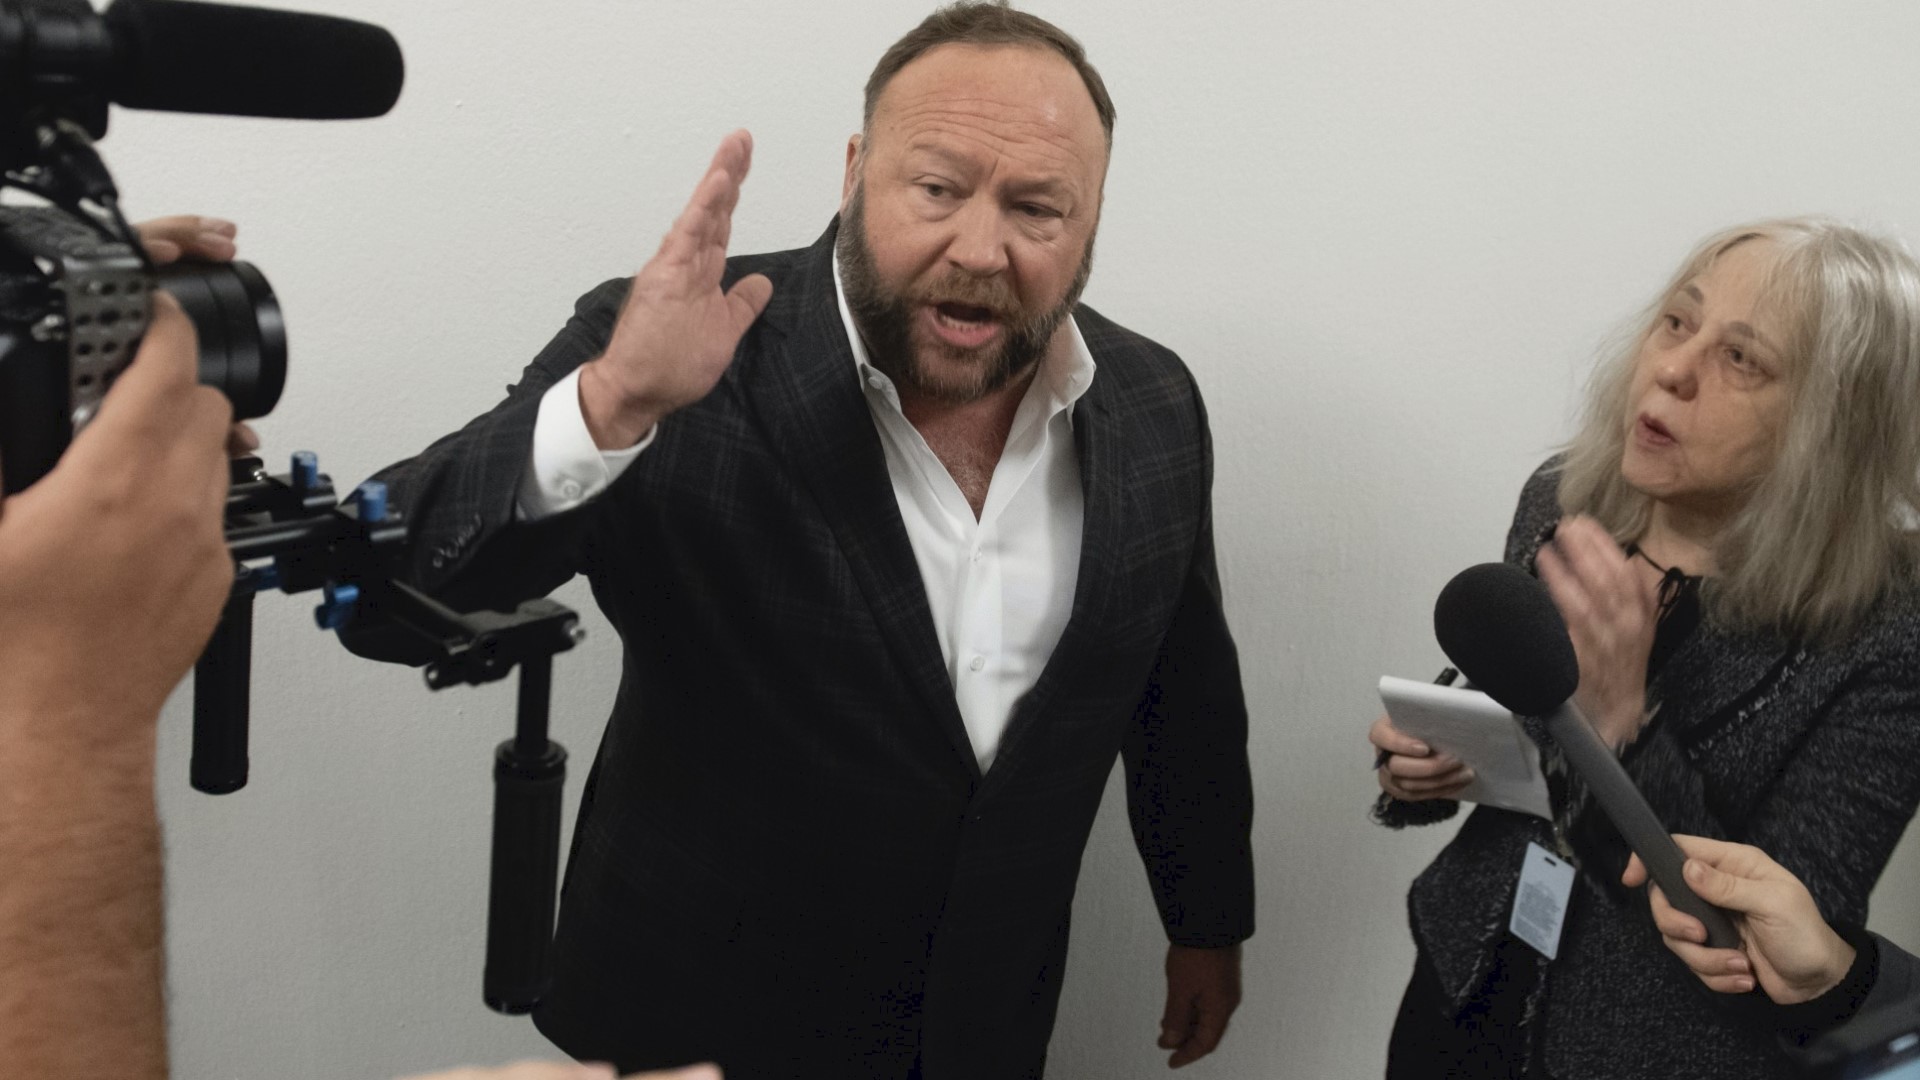 Sandy Hook shooting conspiracy theorist Alex Jones is seeking to dismiss a lawsuit brought against him by one of the victim's family members. Veuer's Justin Kircher has the story.